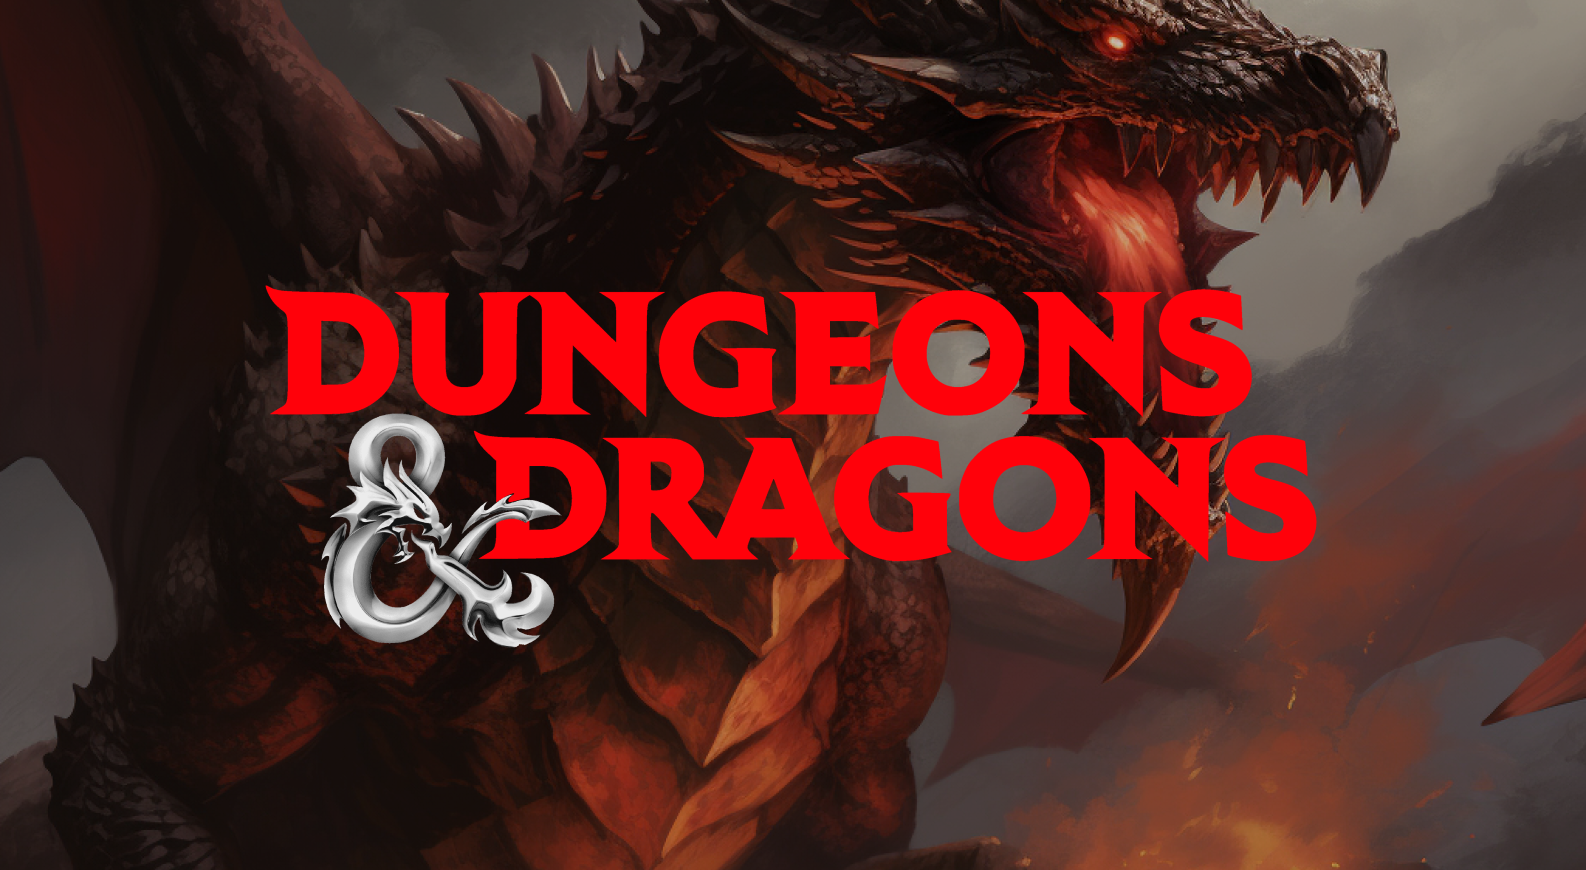 The Dungeons and Dragons roleplaying game